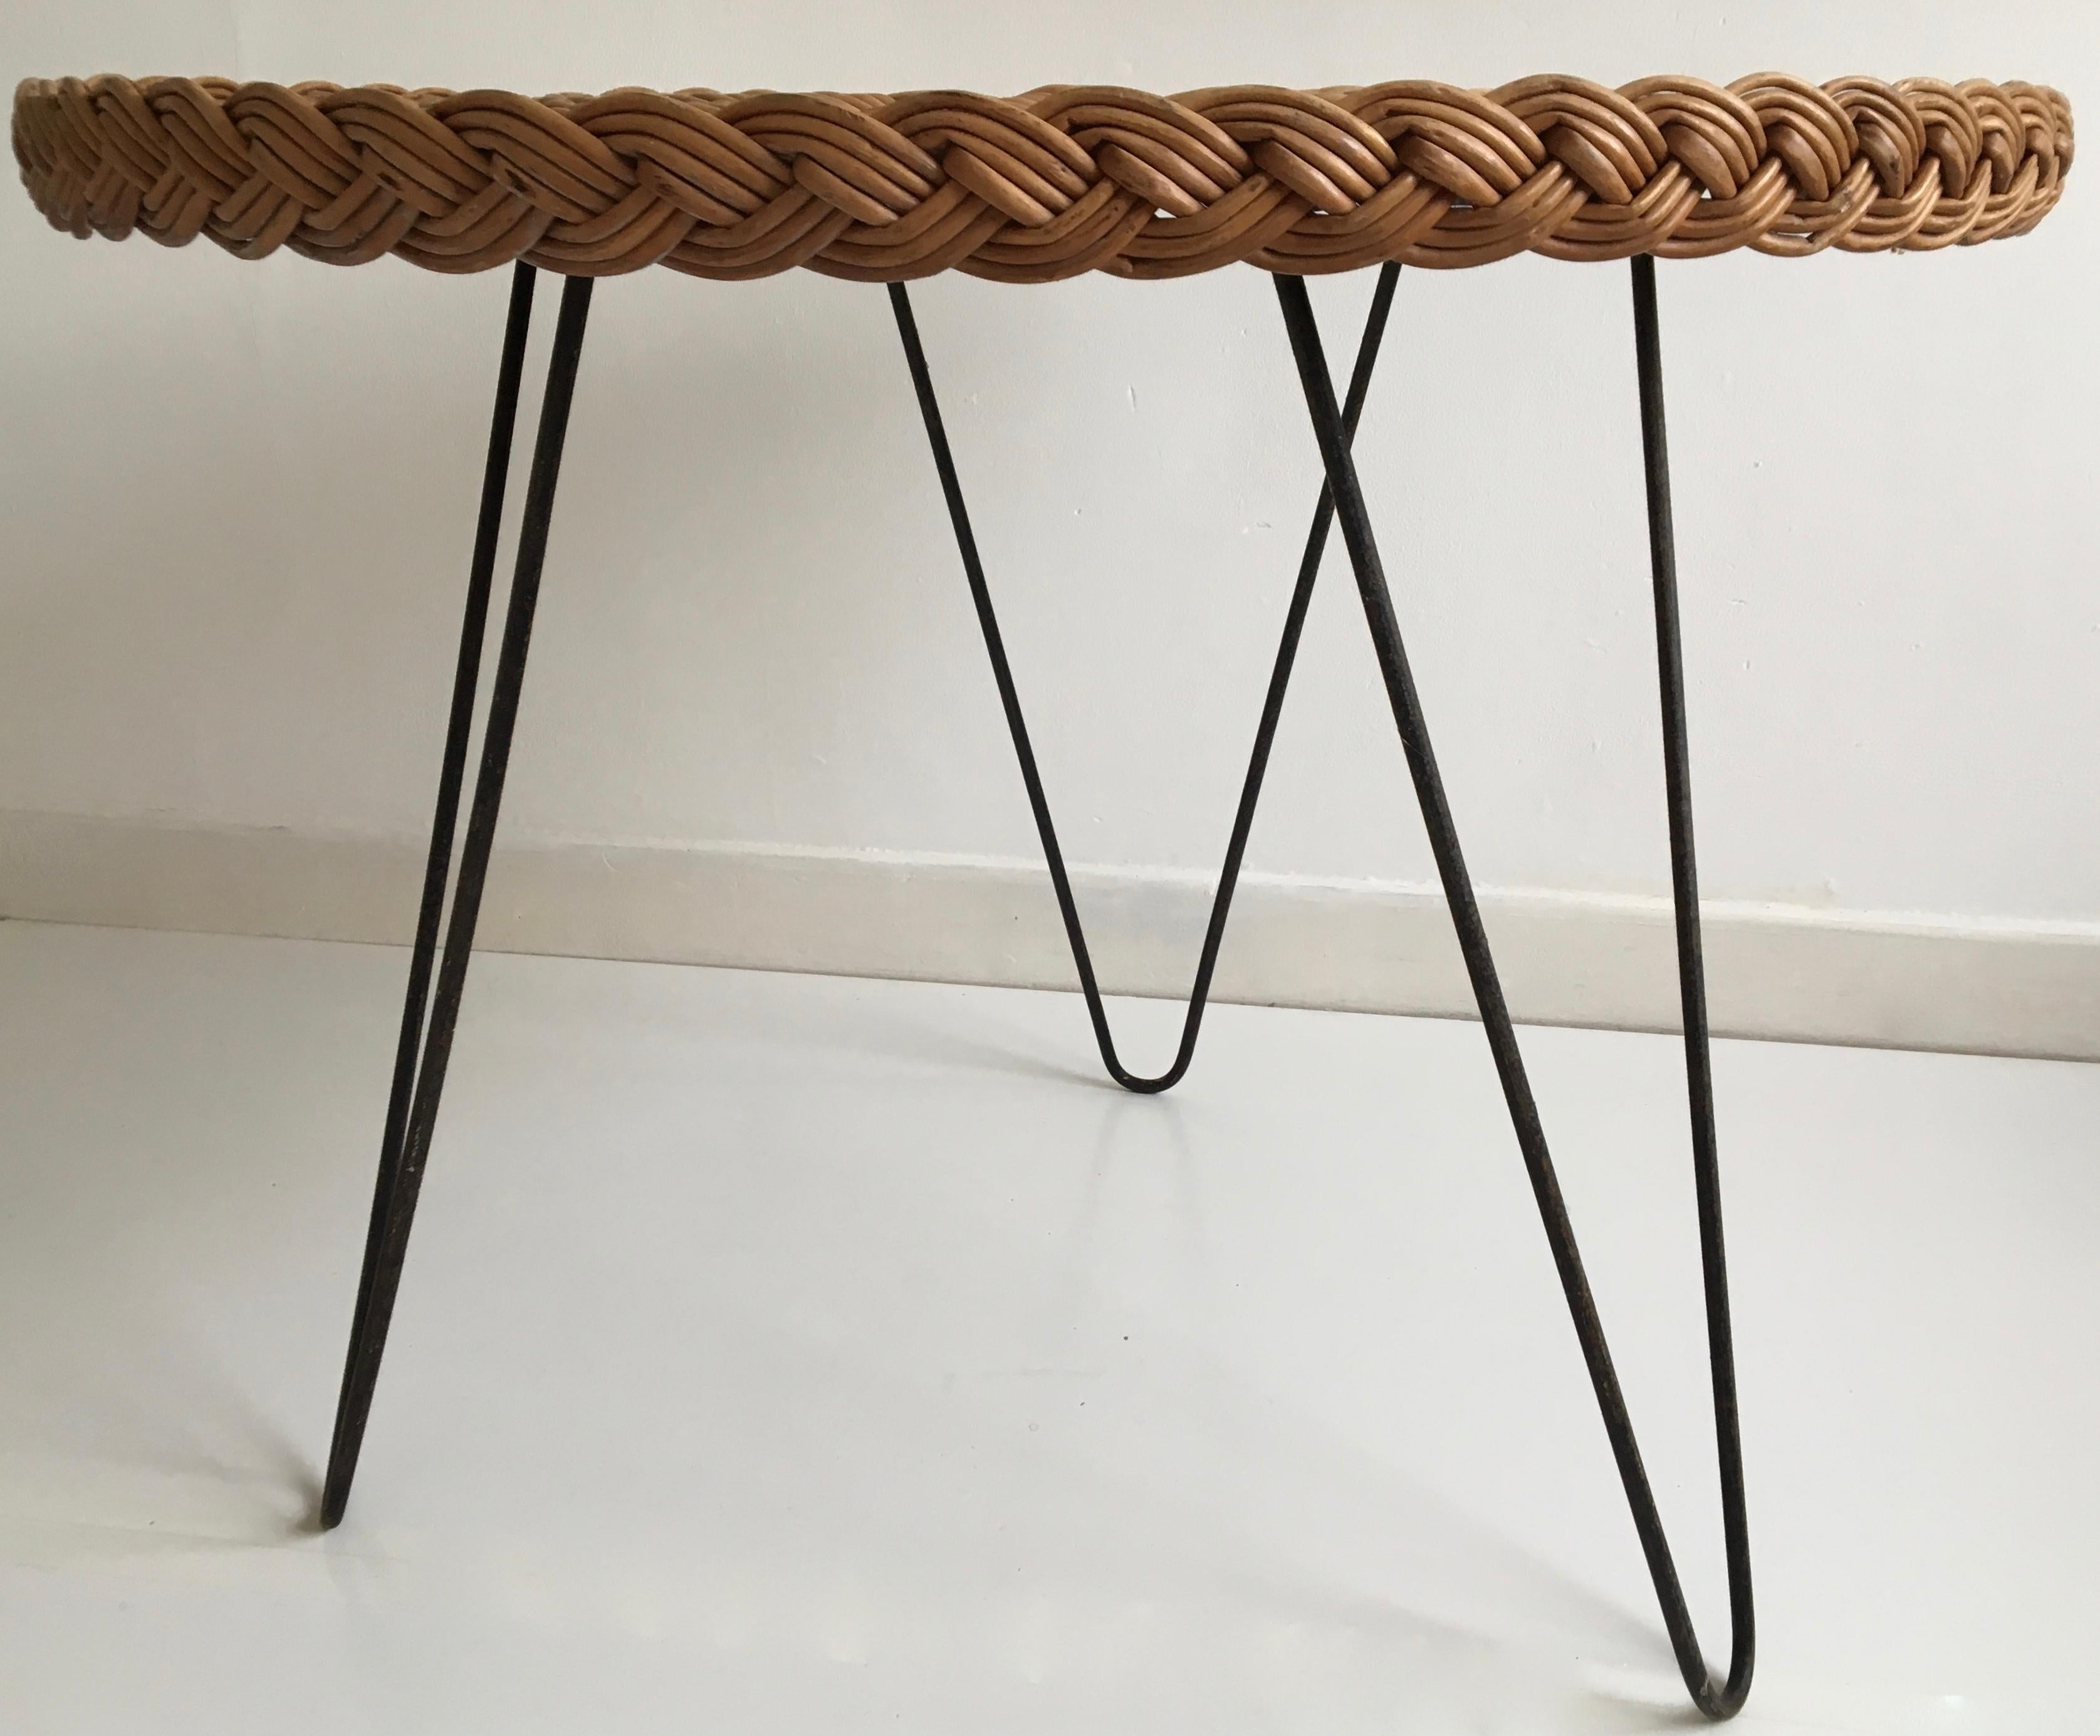 Woven French Circular Wicker Breakfast / Side Table with Hairpin Legs, circa 1950